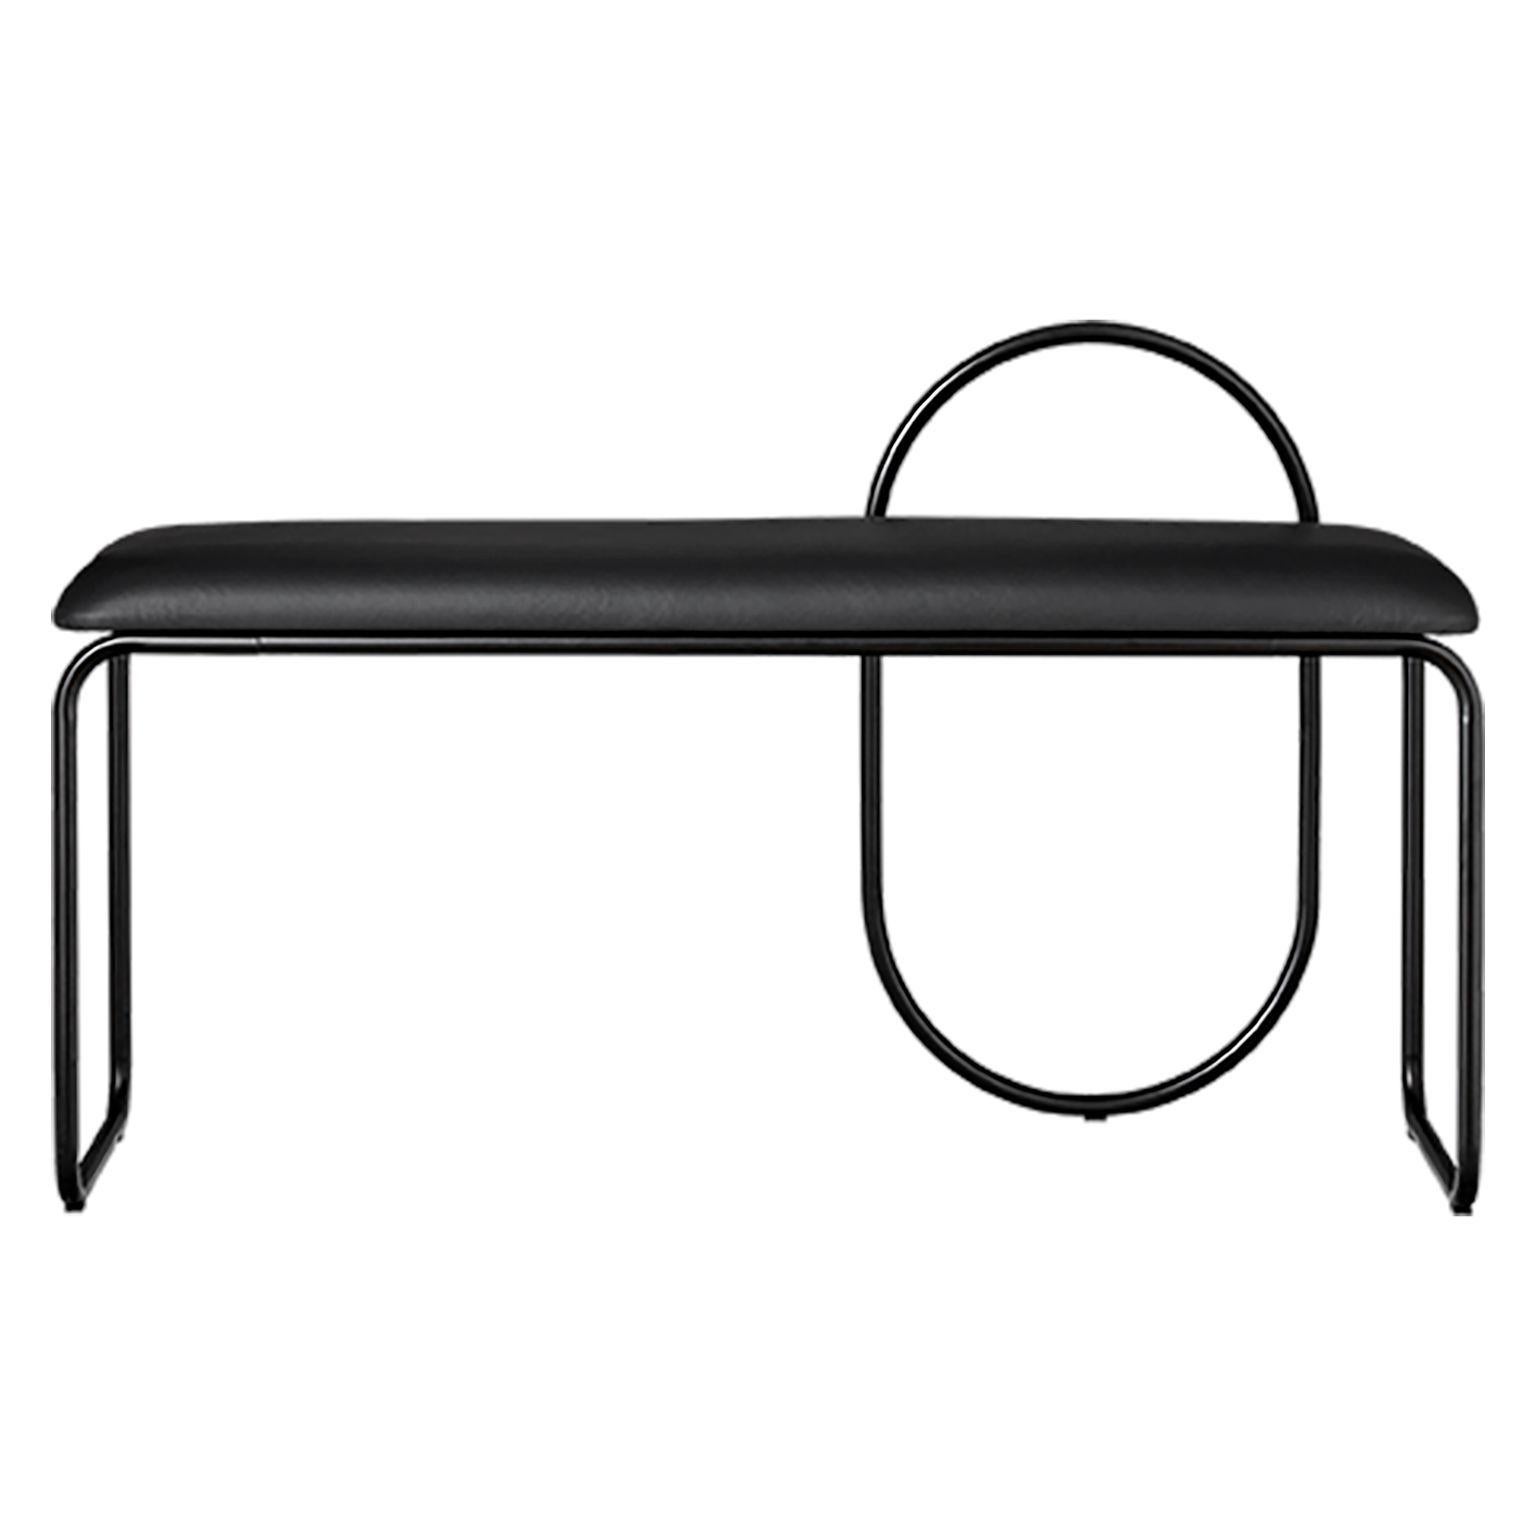 Black leather Minimalist bench
Dimensions: L 110 x W 39 x H 68 cm
Materials: Black leather, steel

The collection includes benches, chairs, shelves and mirrors in a wide variety of sizes.